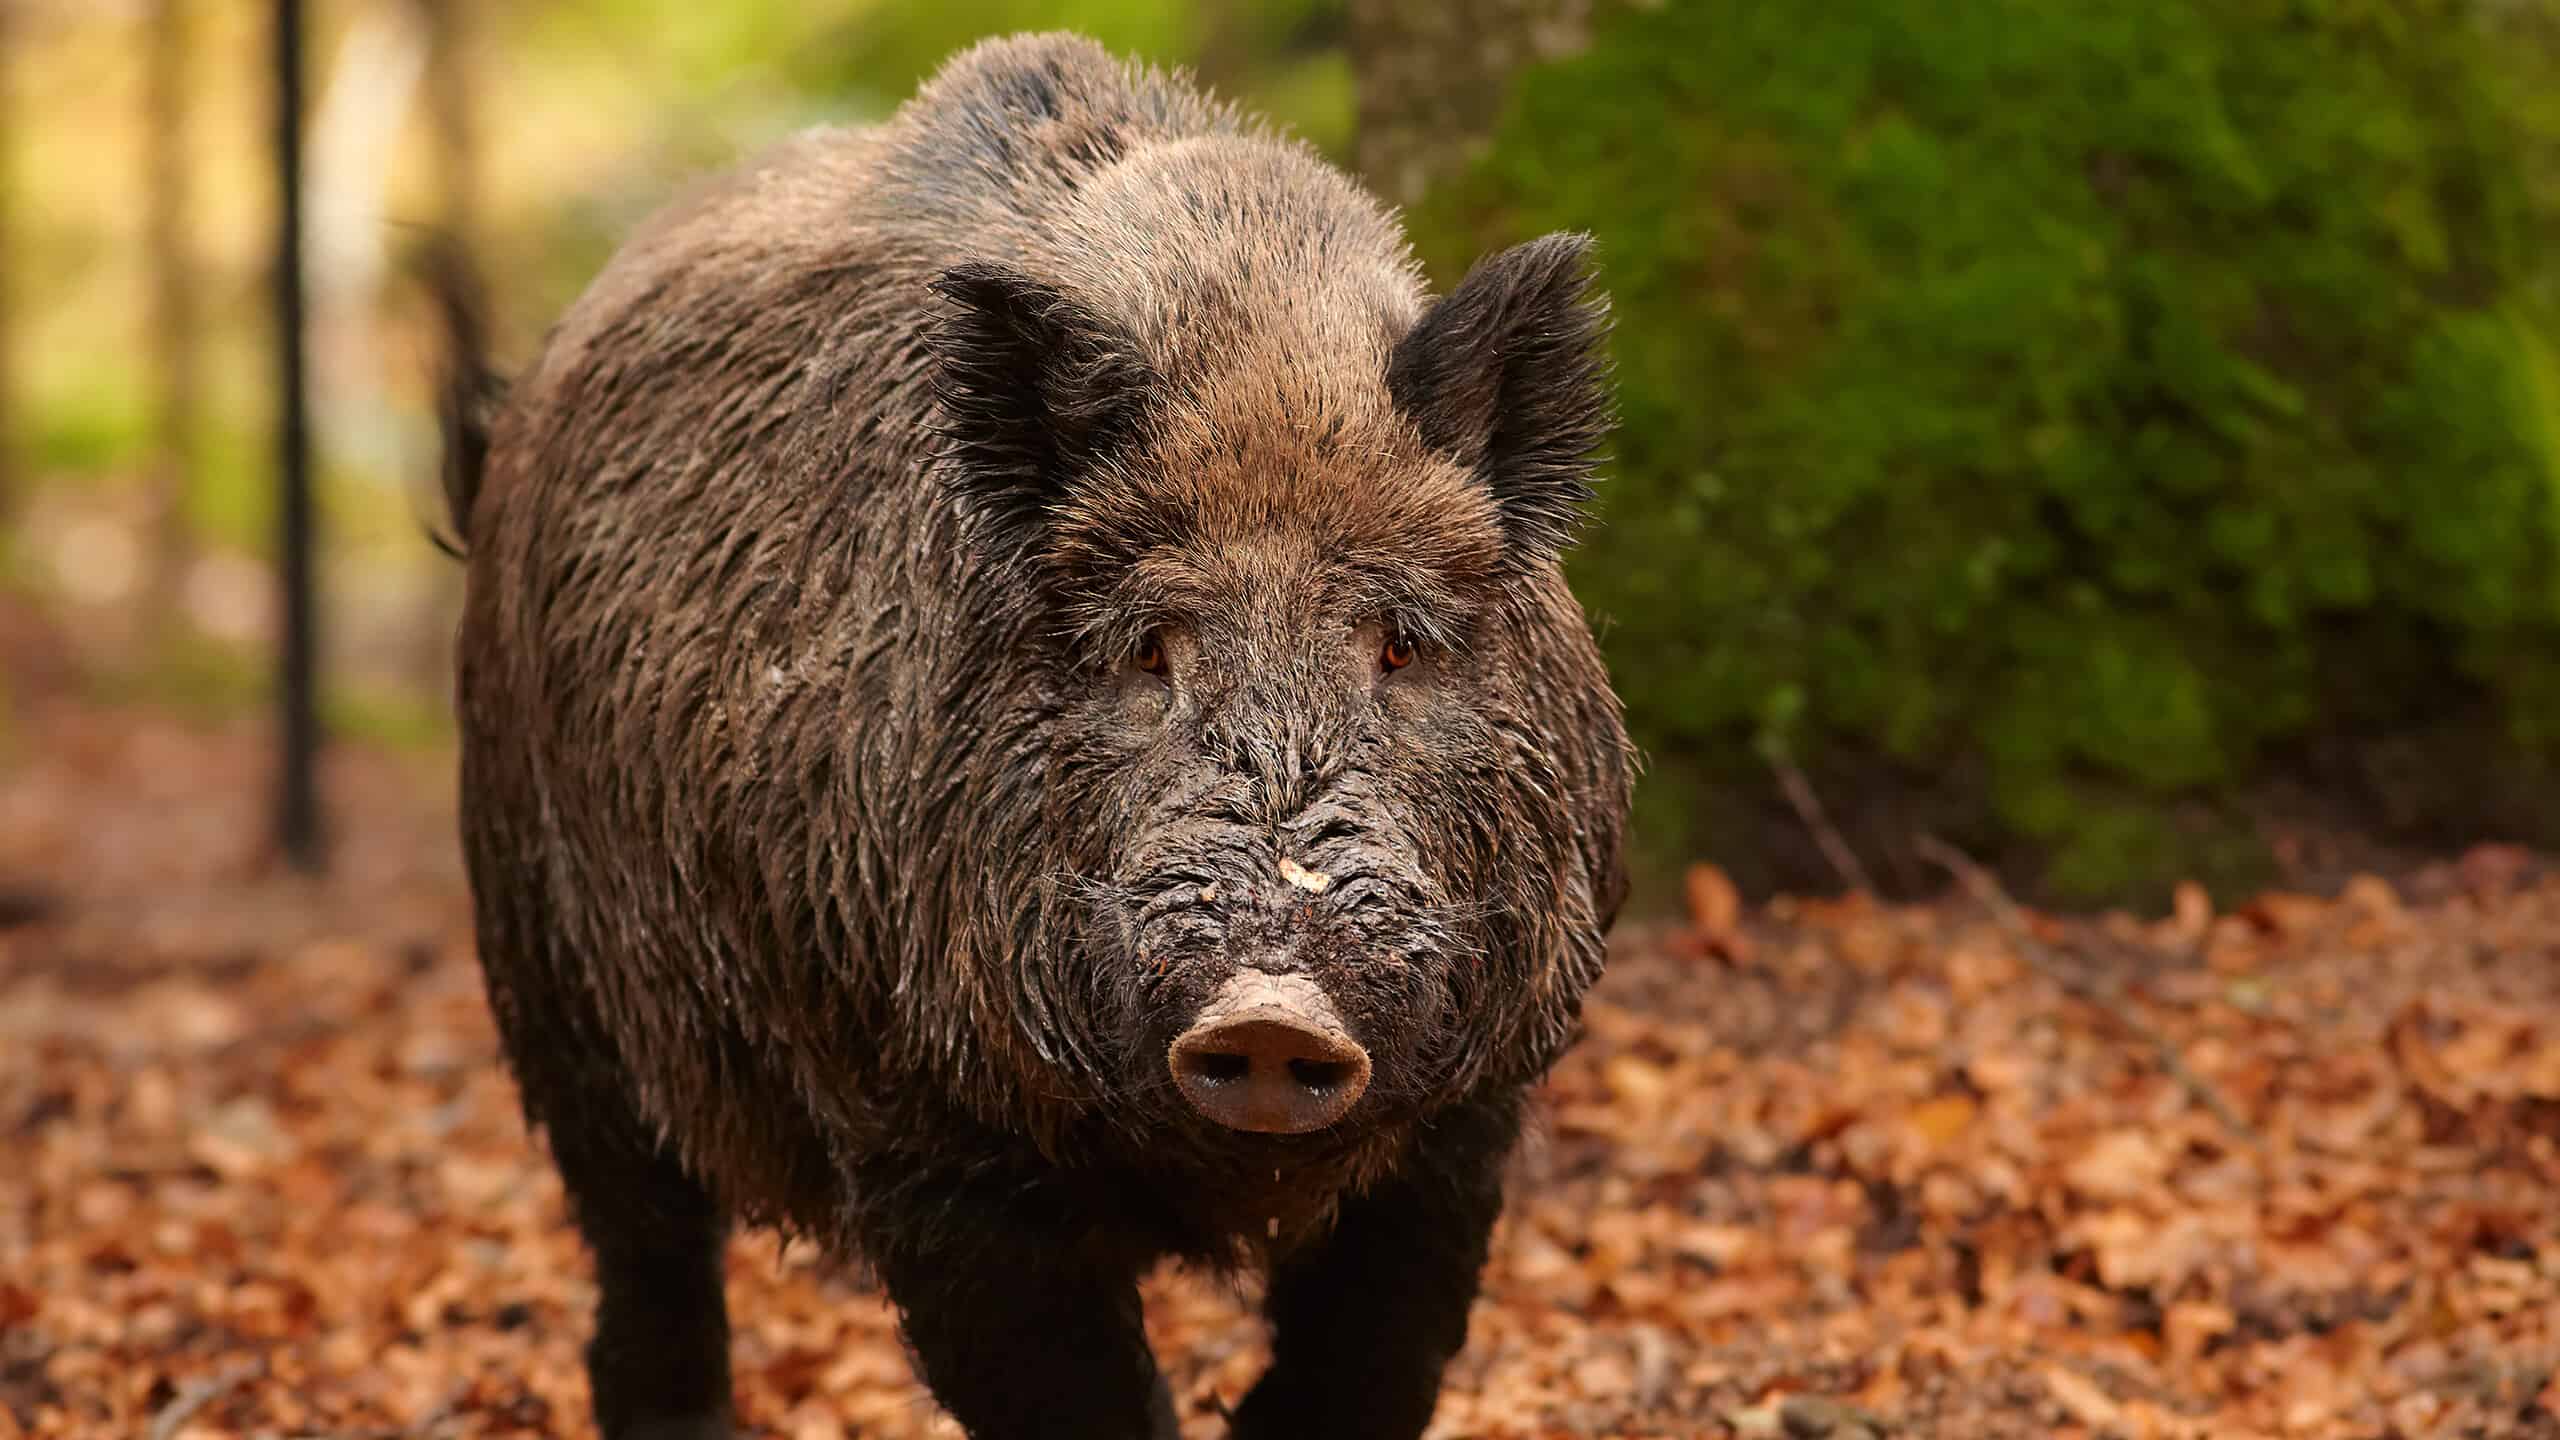 Wild Boars in South Carolina: Population and Hunting Rules